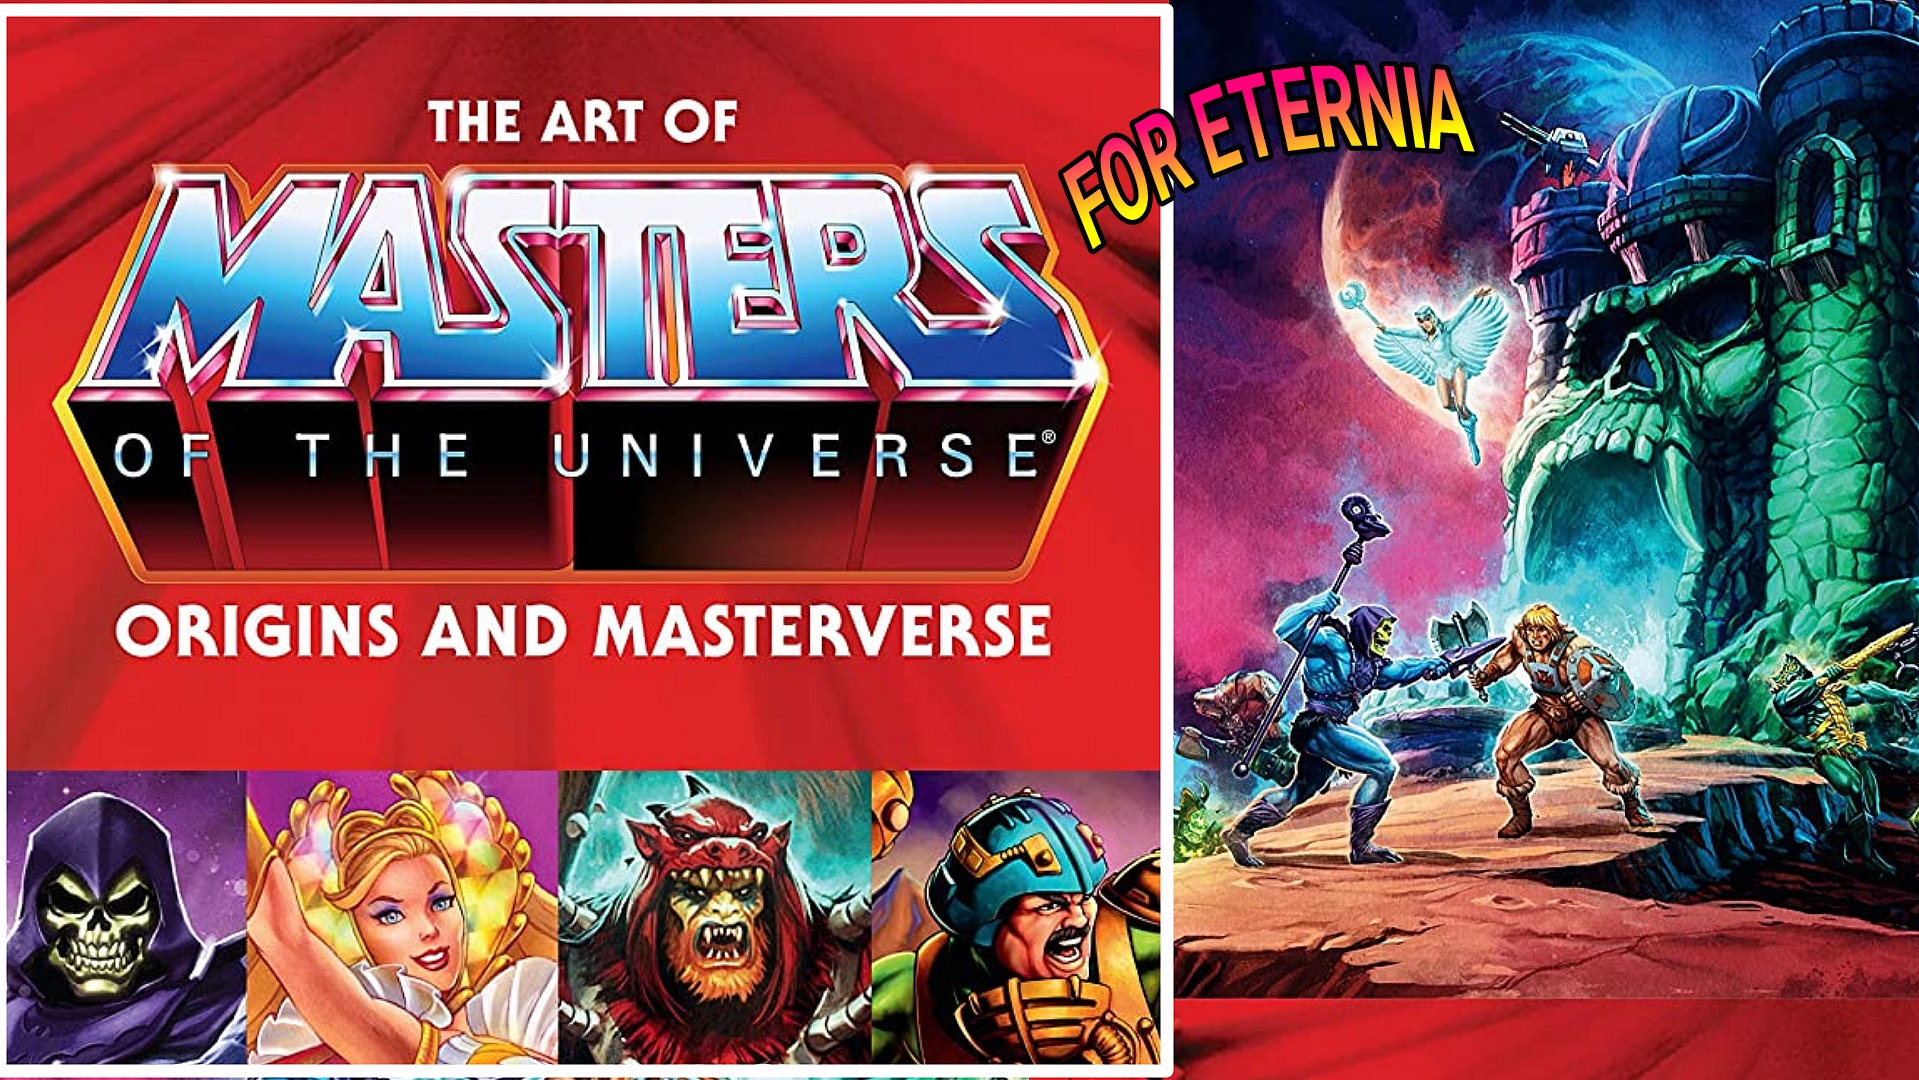 The Art of Masters of the Universe: Origins and Masterverse Book is Announced *Updated*